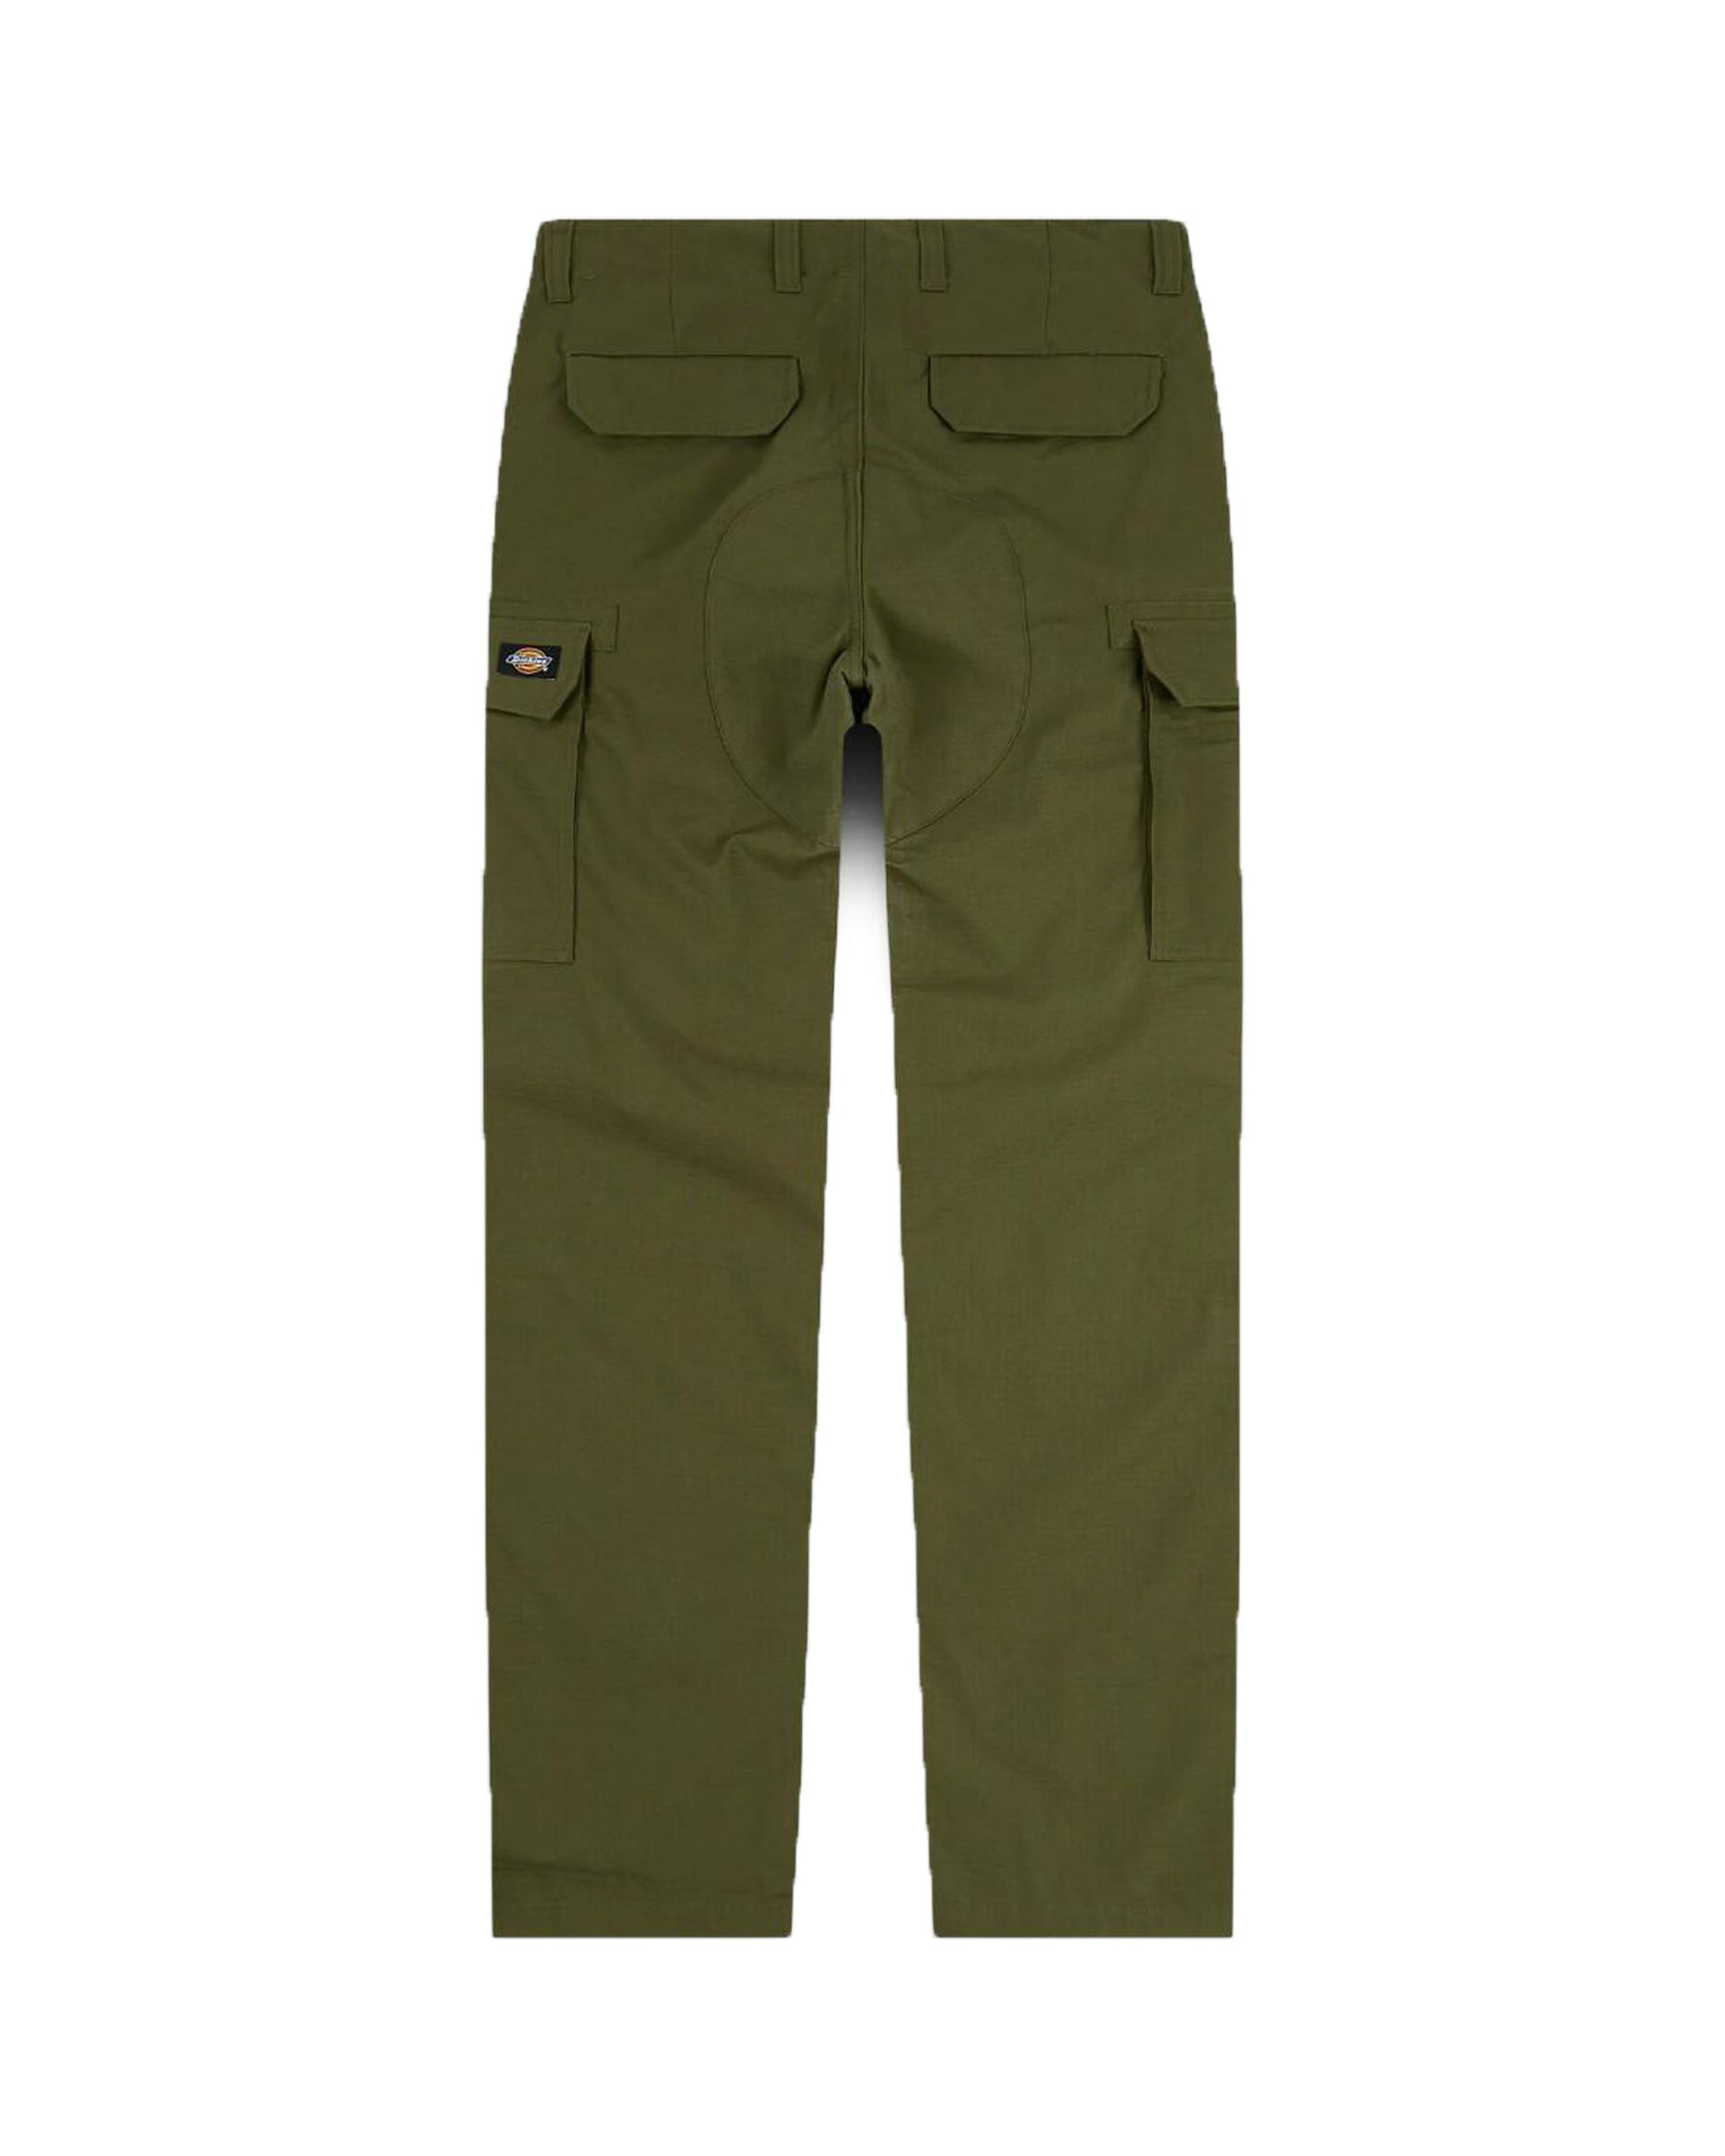 Dickies Millerville Military Green Pant